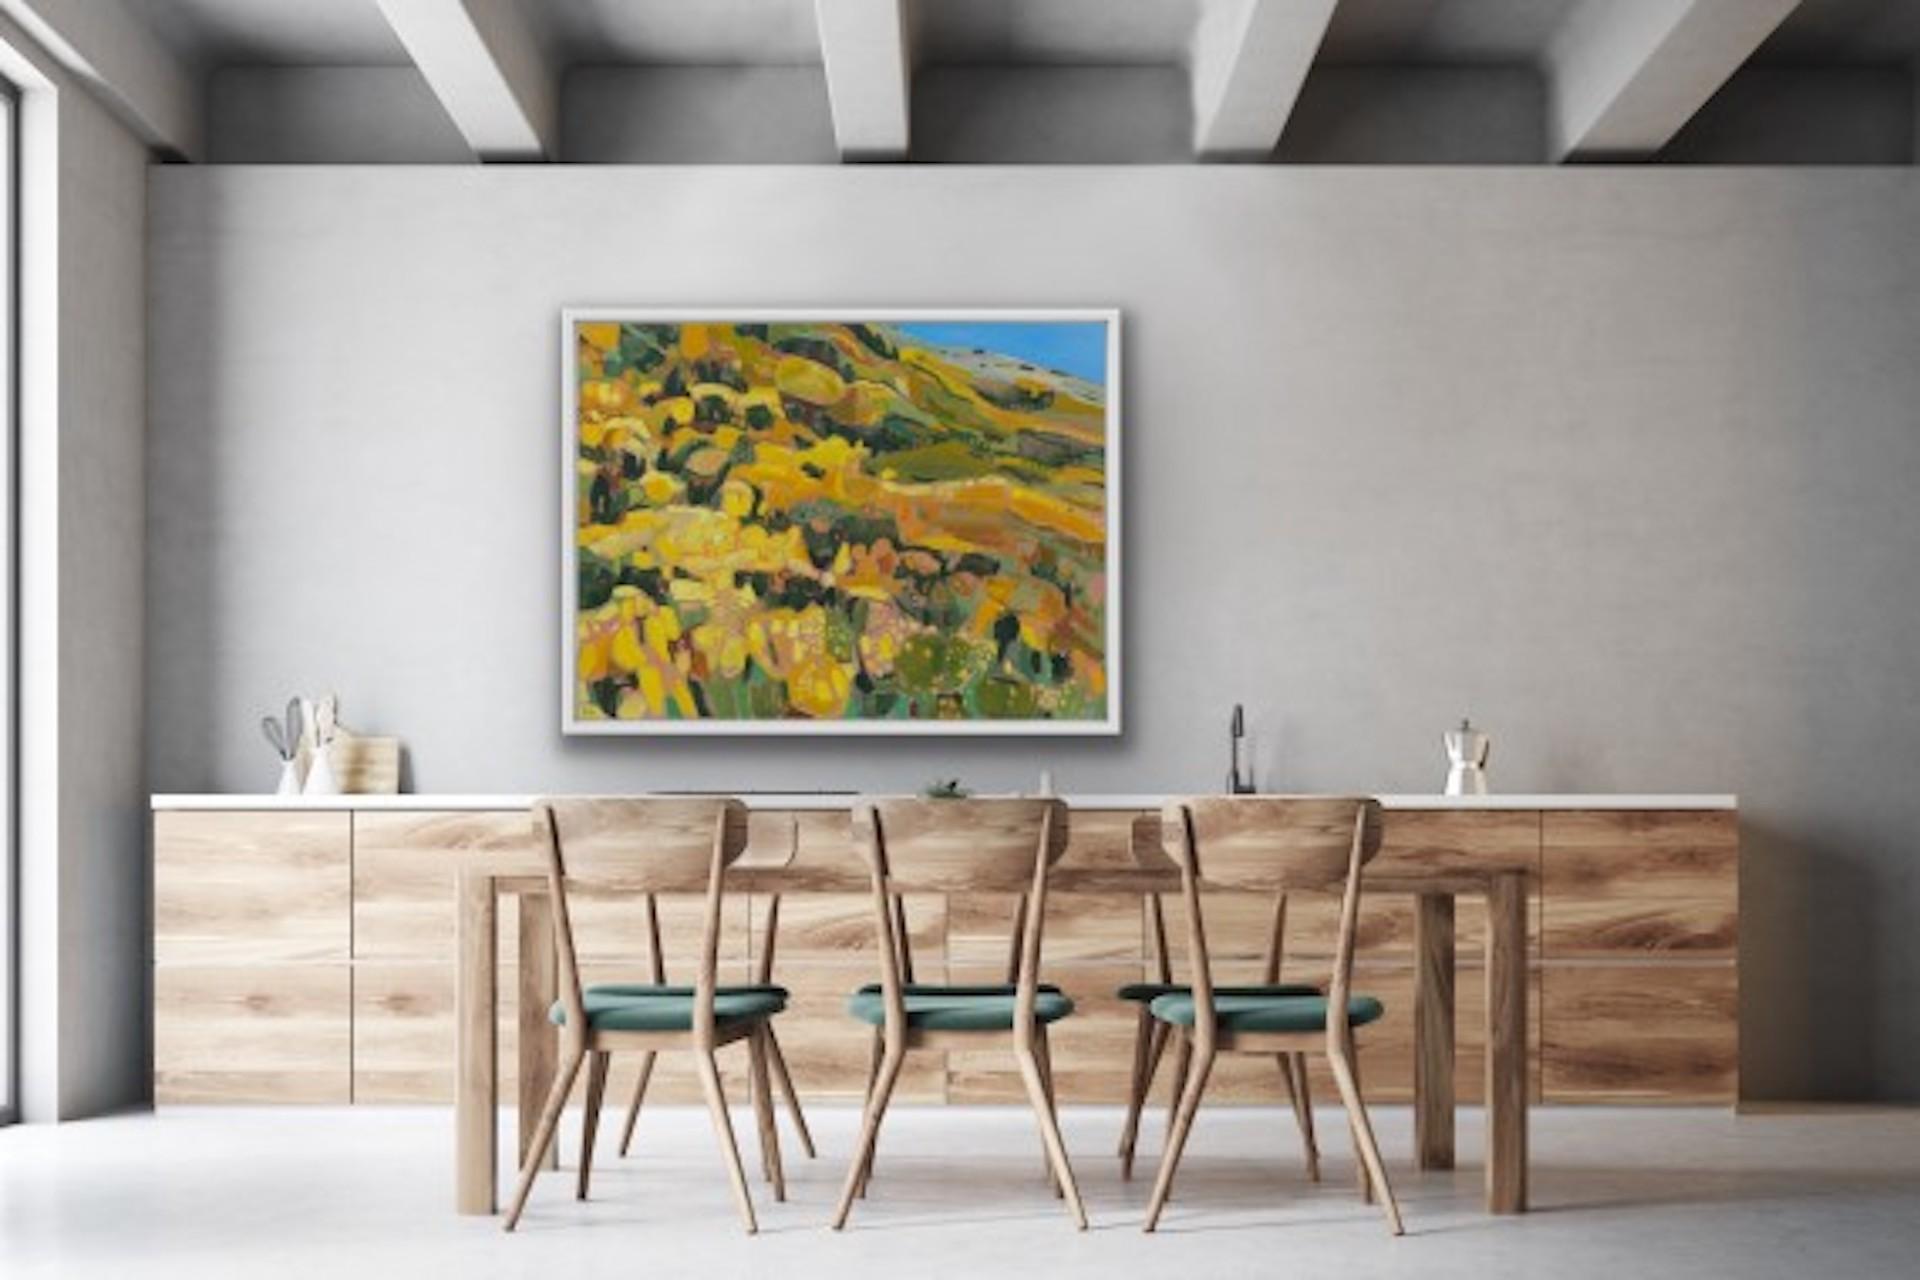 Wind Across the Gorse, Original painting, Contemporary Landscape Art, Yellow art - Abstract Painting by Elaine Kazimierczuk